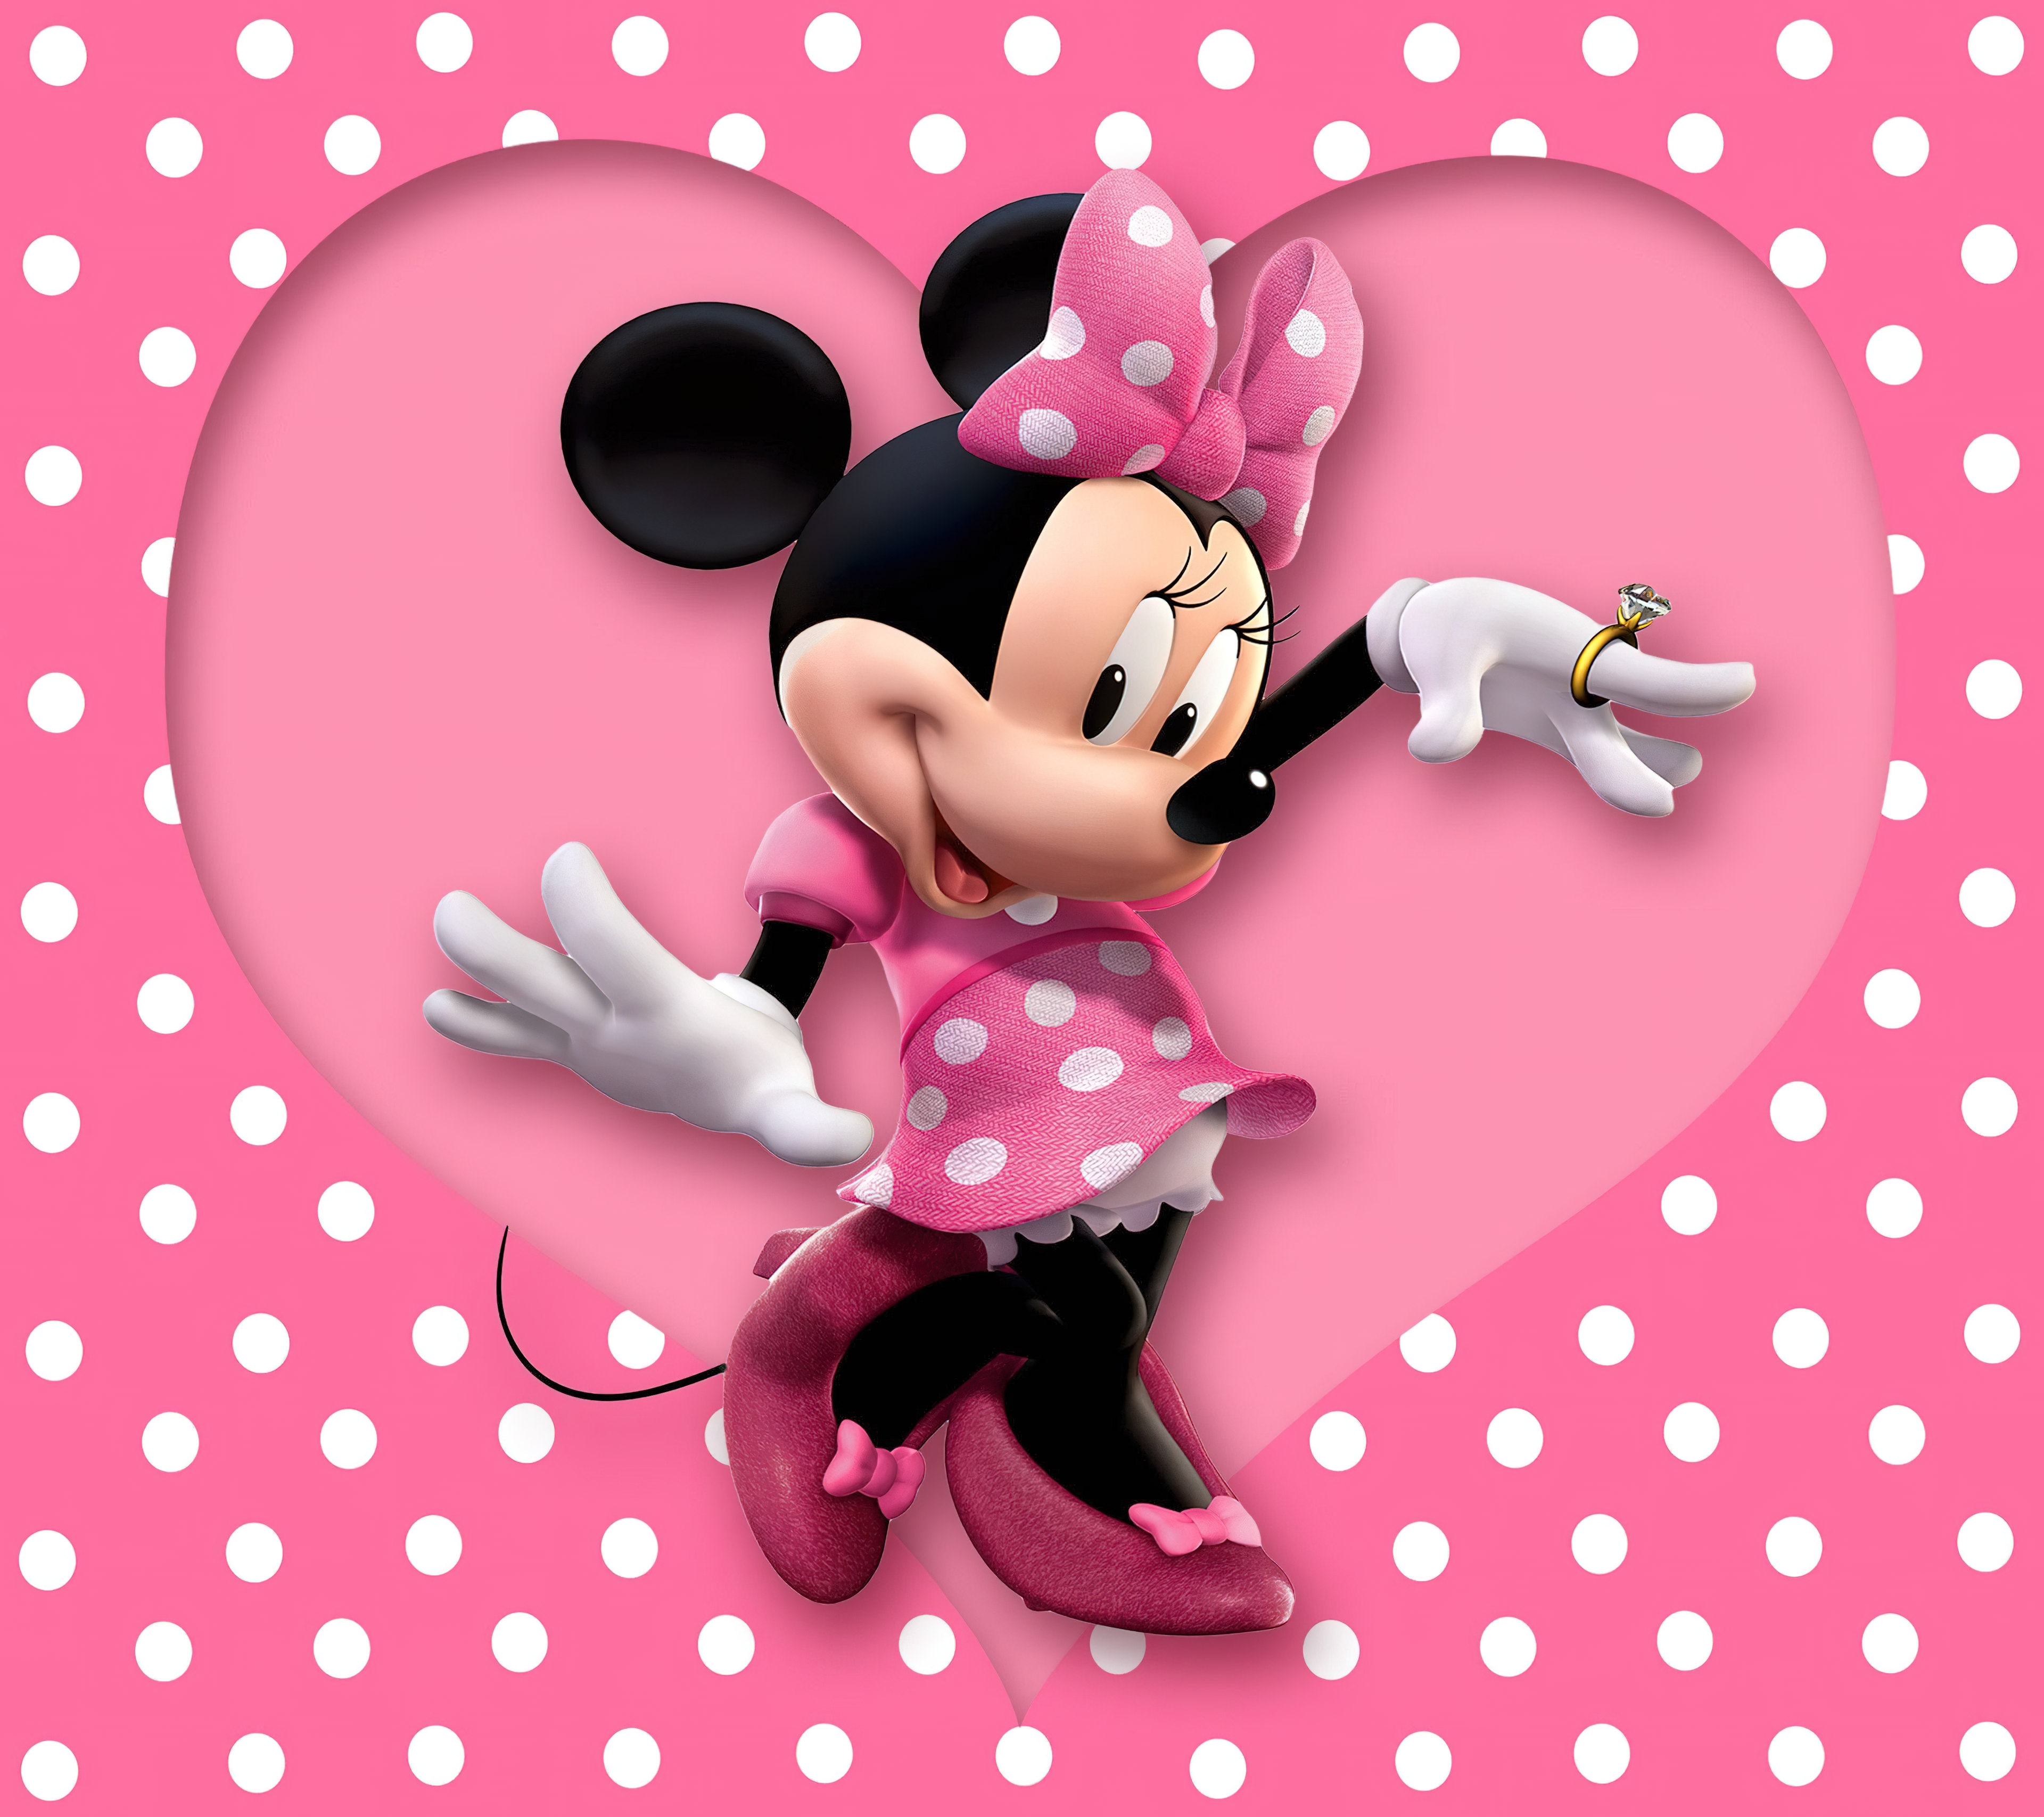 HD wallpaper, Pink Heart, Pink Background, Disney, Polka Dots, Cartoon, Girly Backgrounds, Minnie Mouse